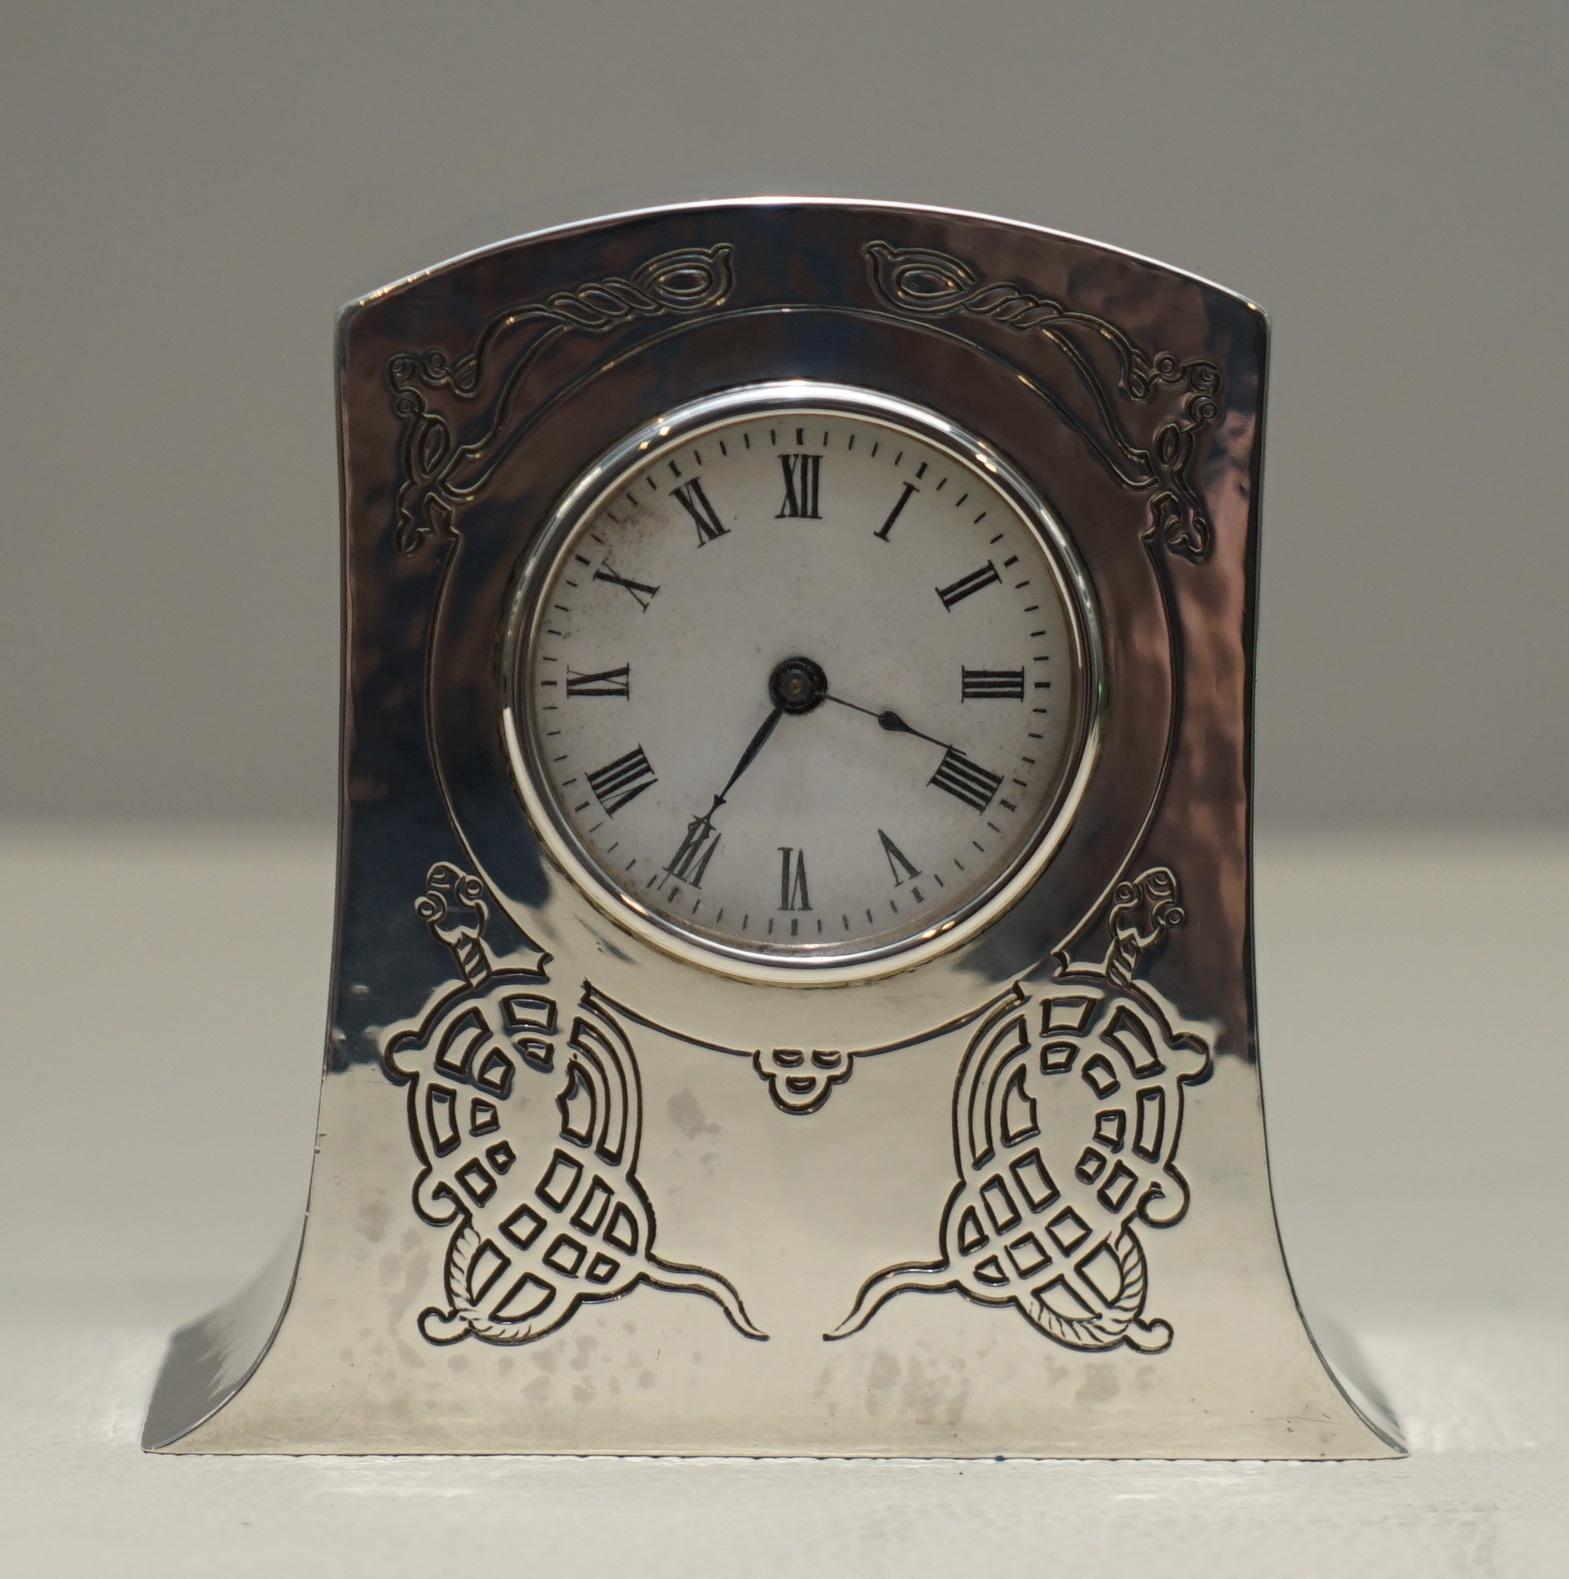 We are delighted to offer for sale this exceptionally rare and absolutely stunning fully hallmarked 1915 Liberty’s London Sterling Silver miniature carriage clock made in the Tudric style 

I have a few very high end Liberty's of London clocks,